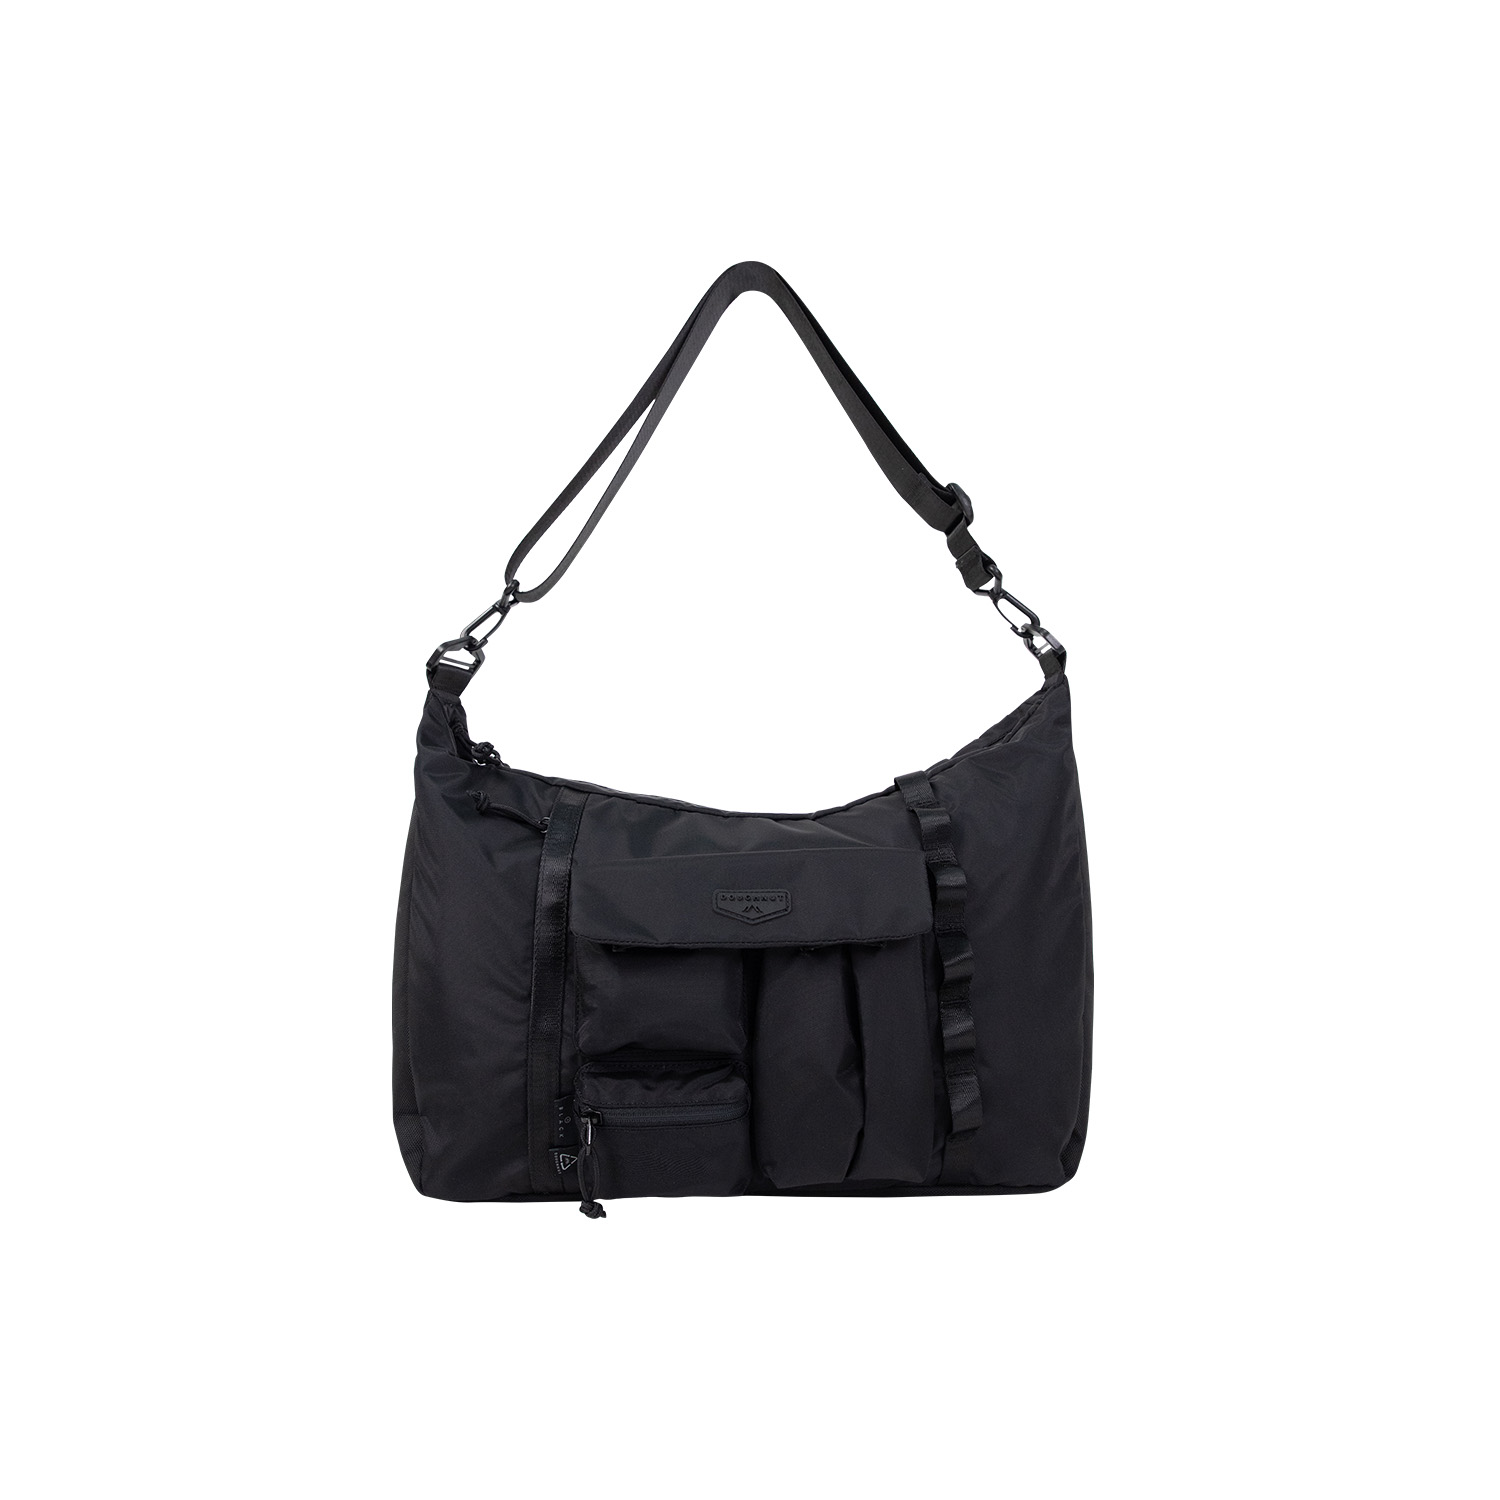 The Actualise Series Metanoia is an all-black utilitarian shoulder bag